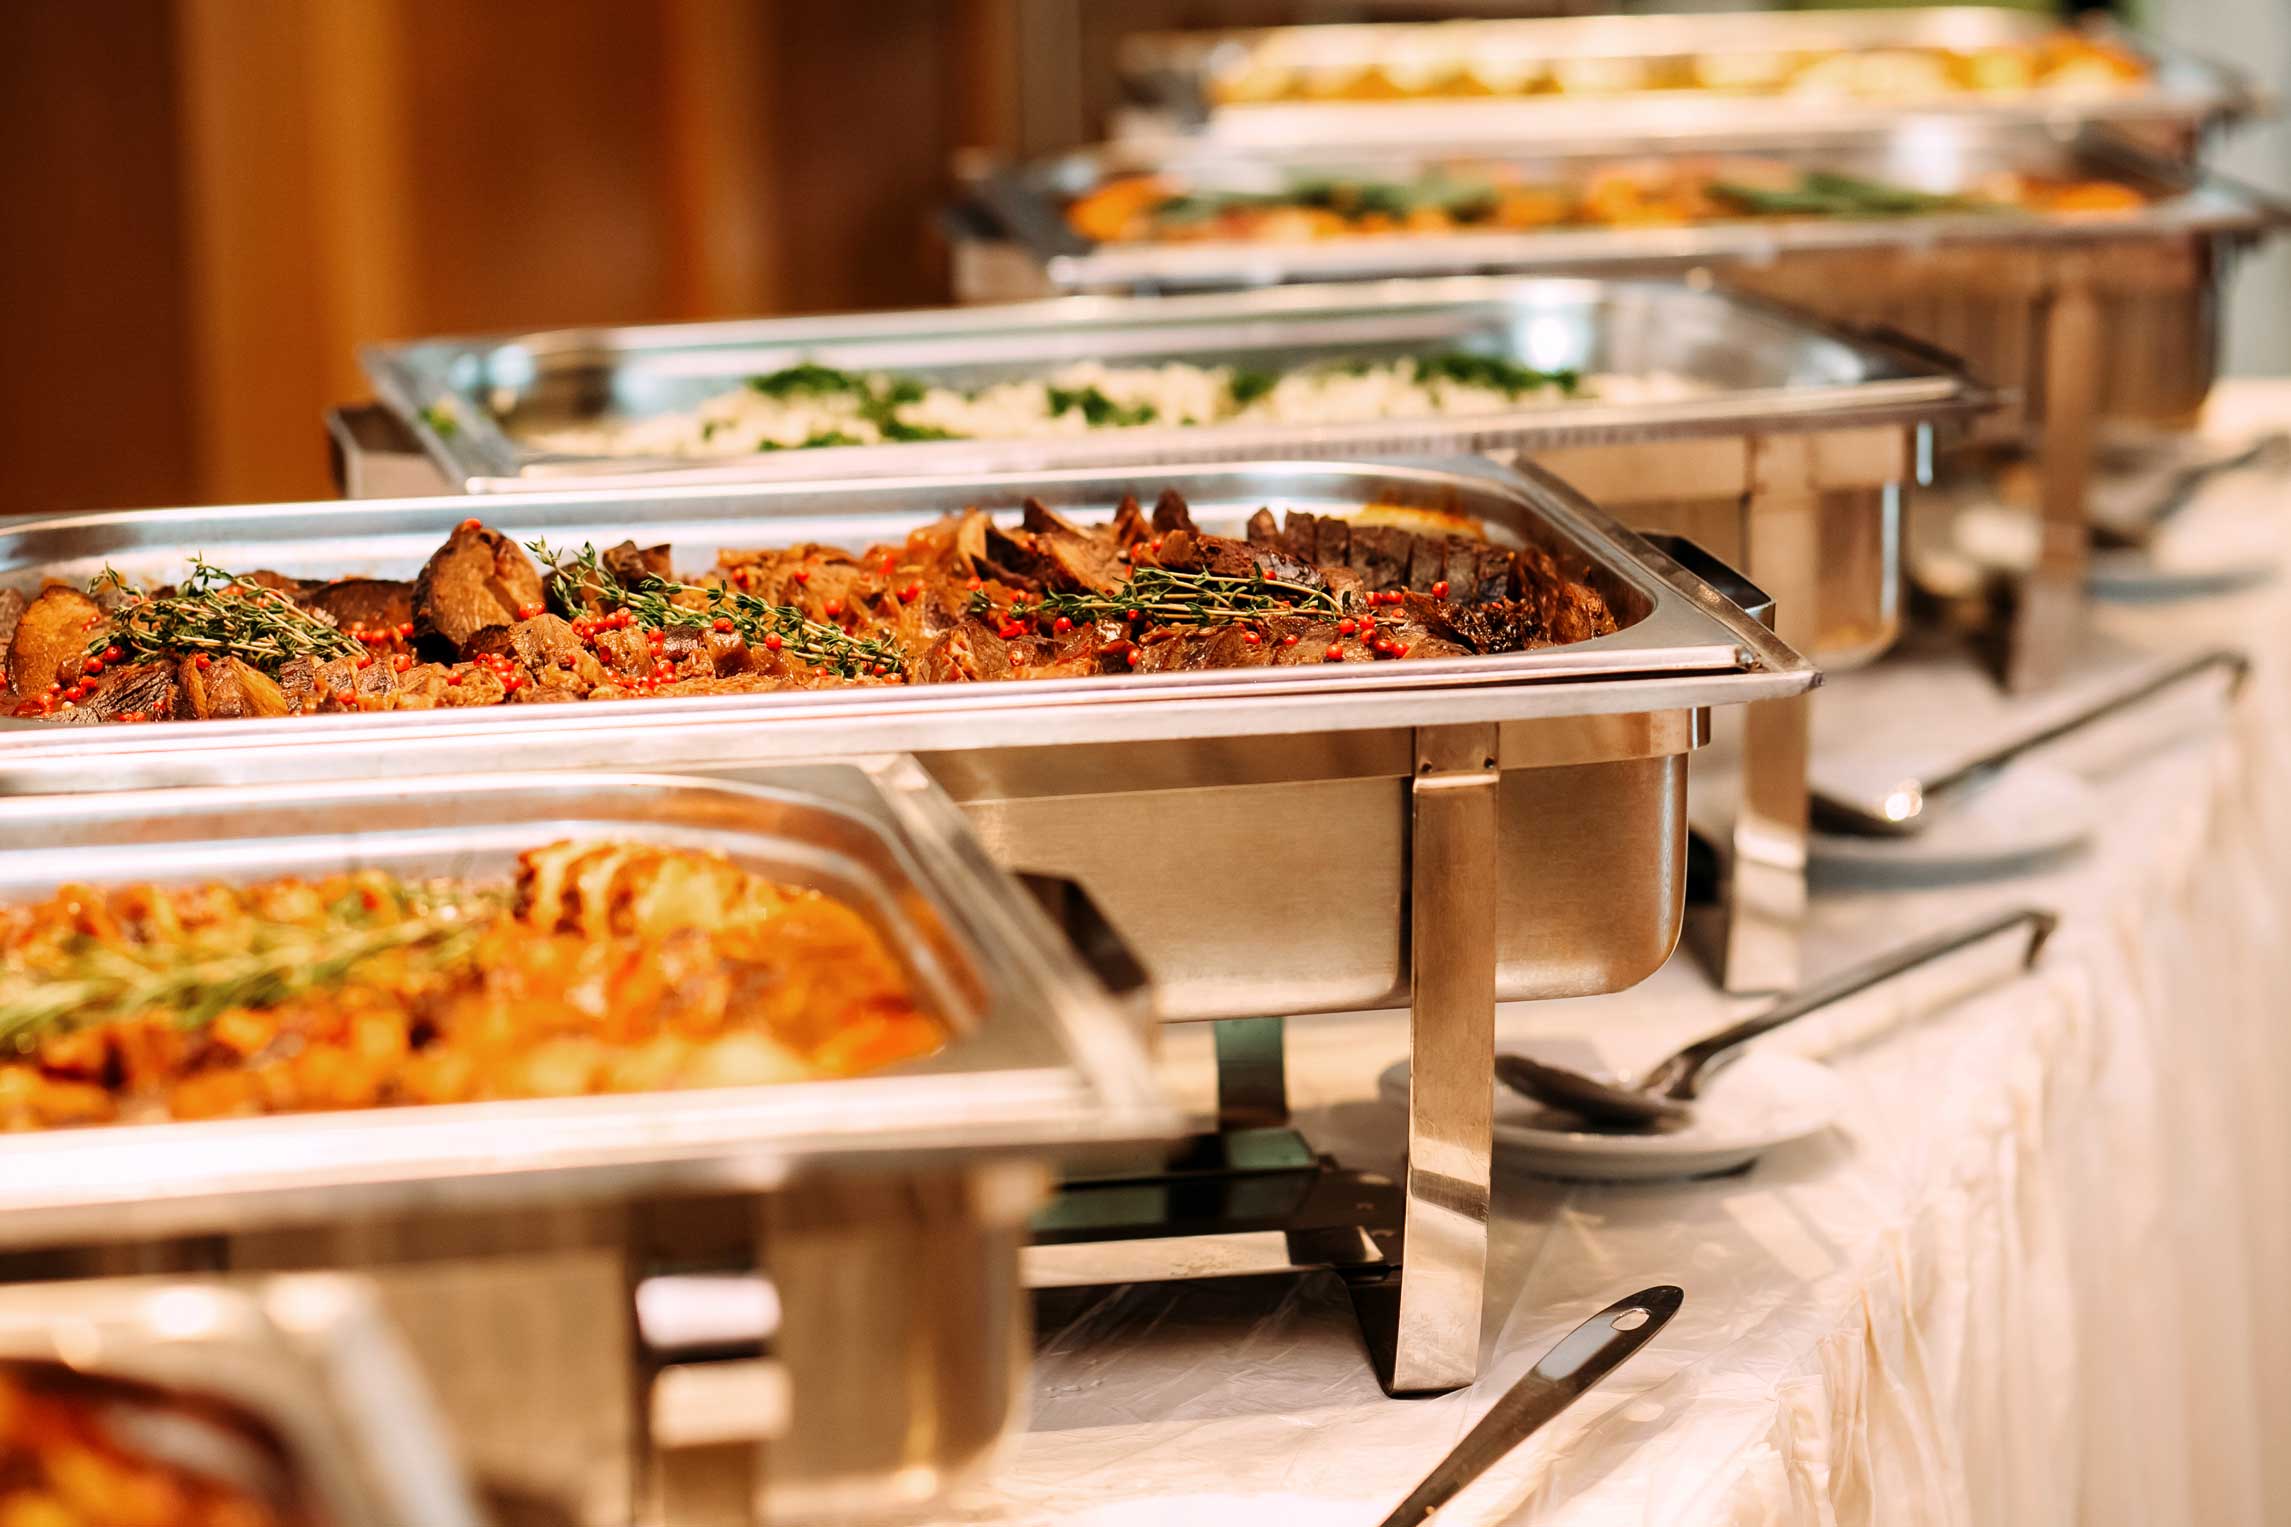 Image of a catering table